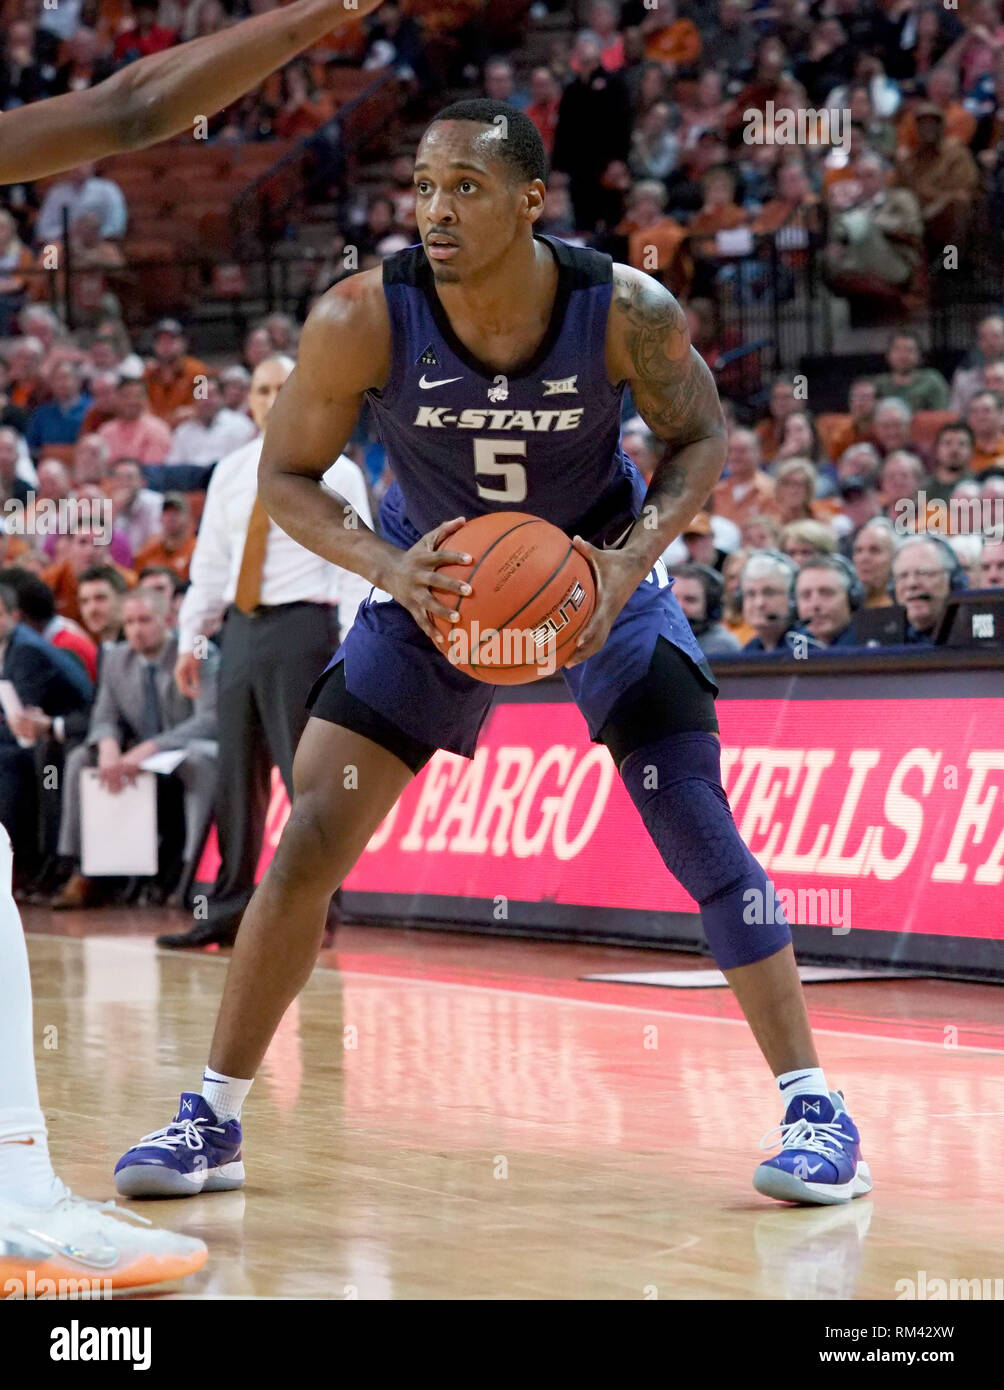 Feb 12, 2019. Barry Brown Jr #5 of the Kansas State Wildcats in action vs the Texas Longhorns at the Frank Erwin Center in Austin Texas. K-State defeats Texas 71-64.Robert Backman/Cal Sport Media. Stock Photo